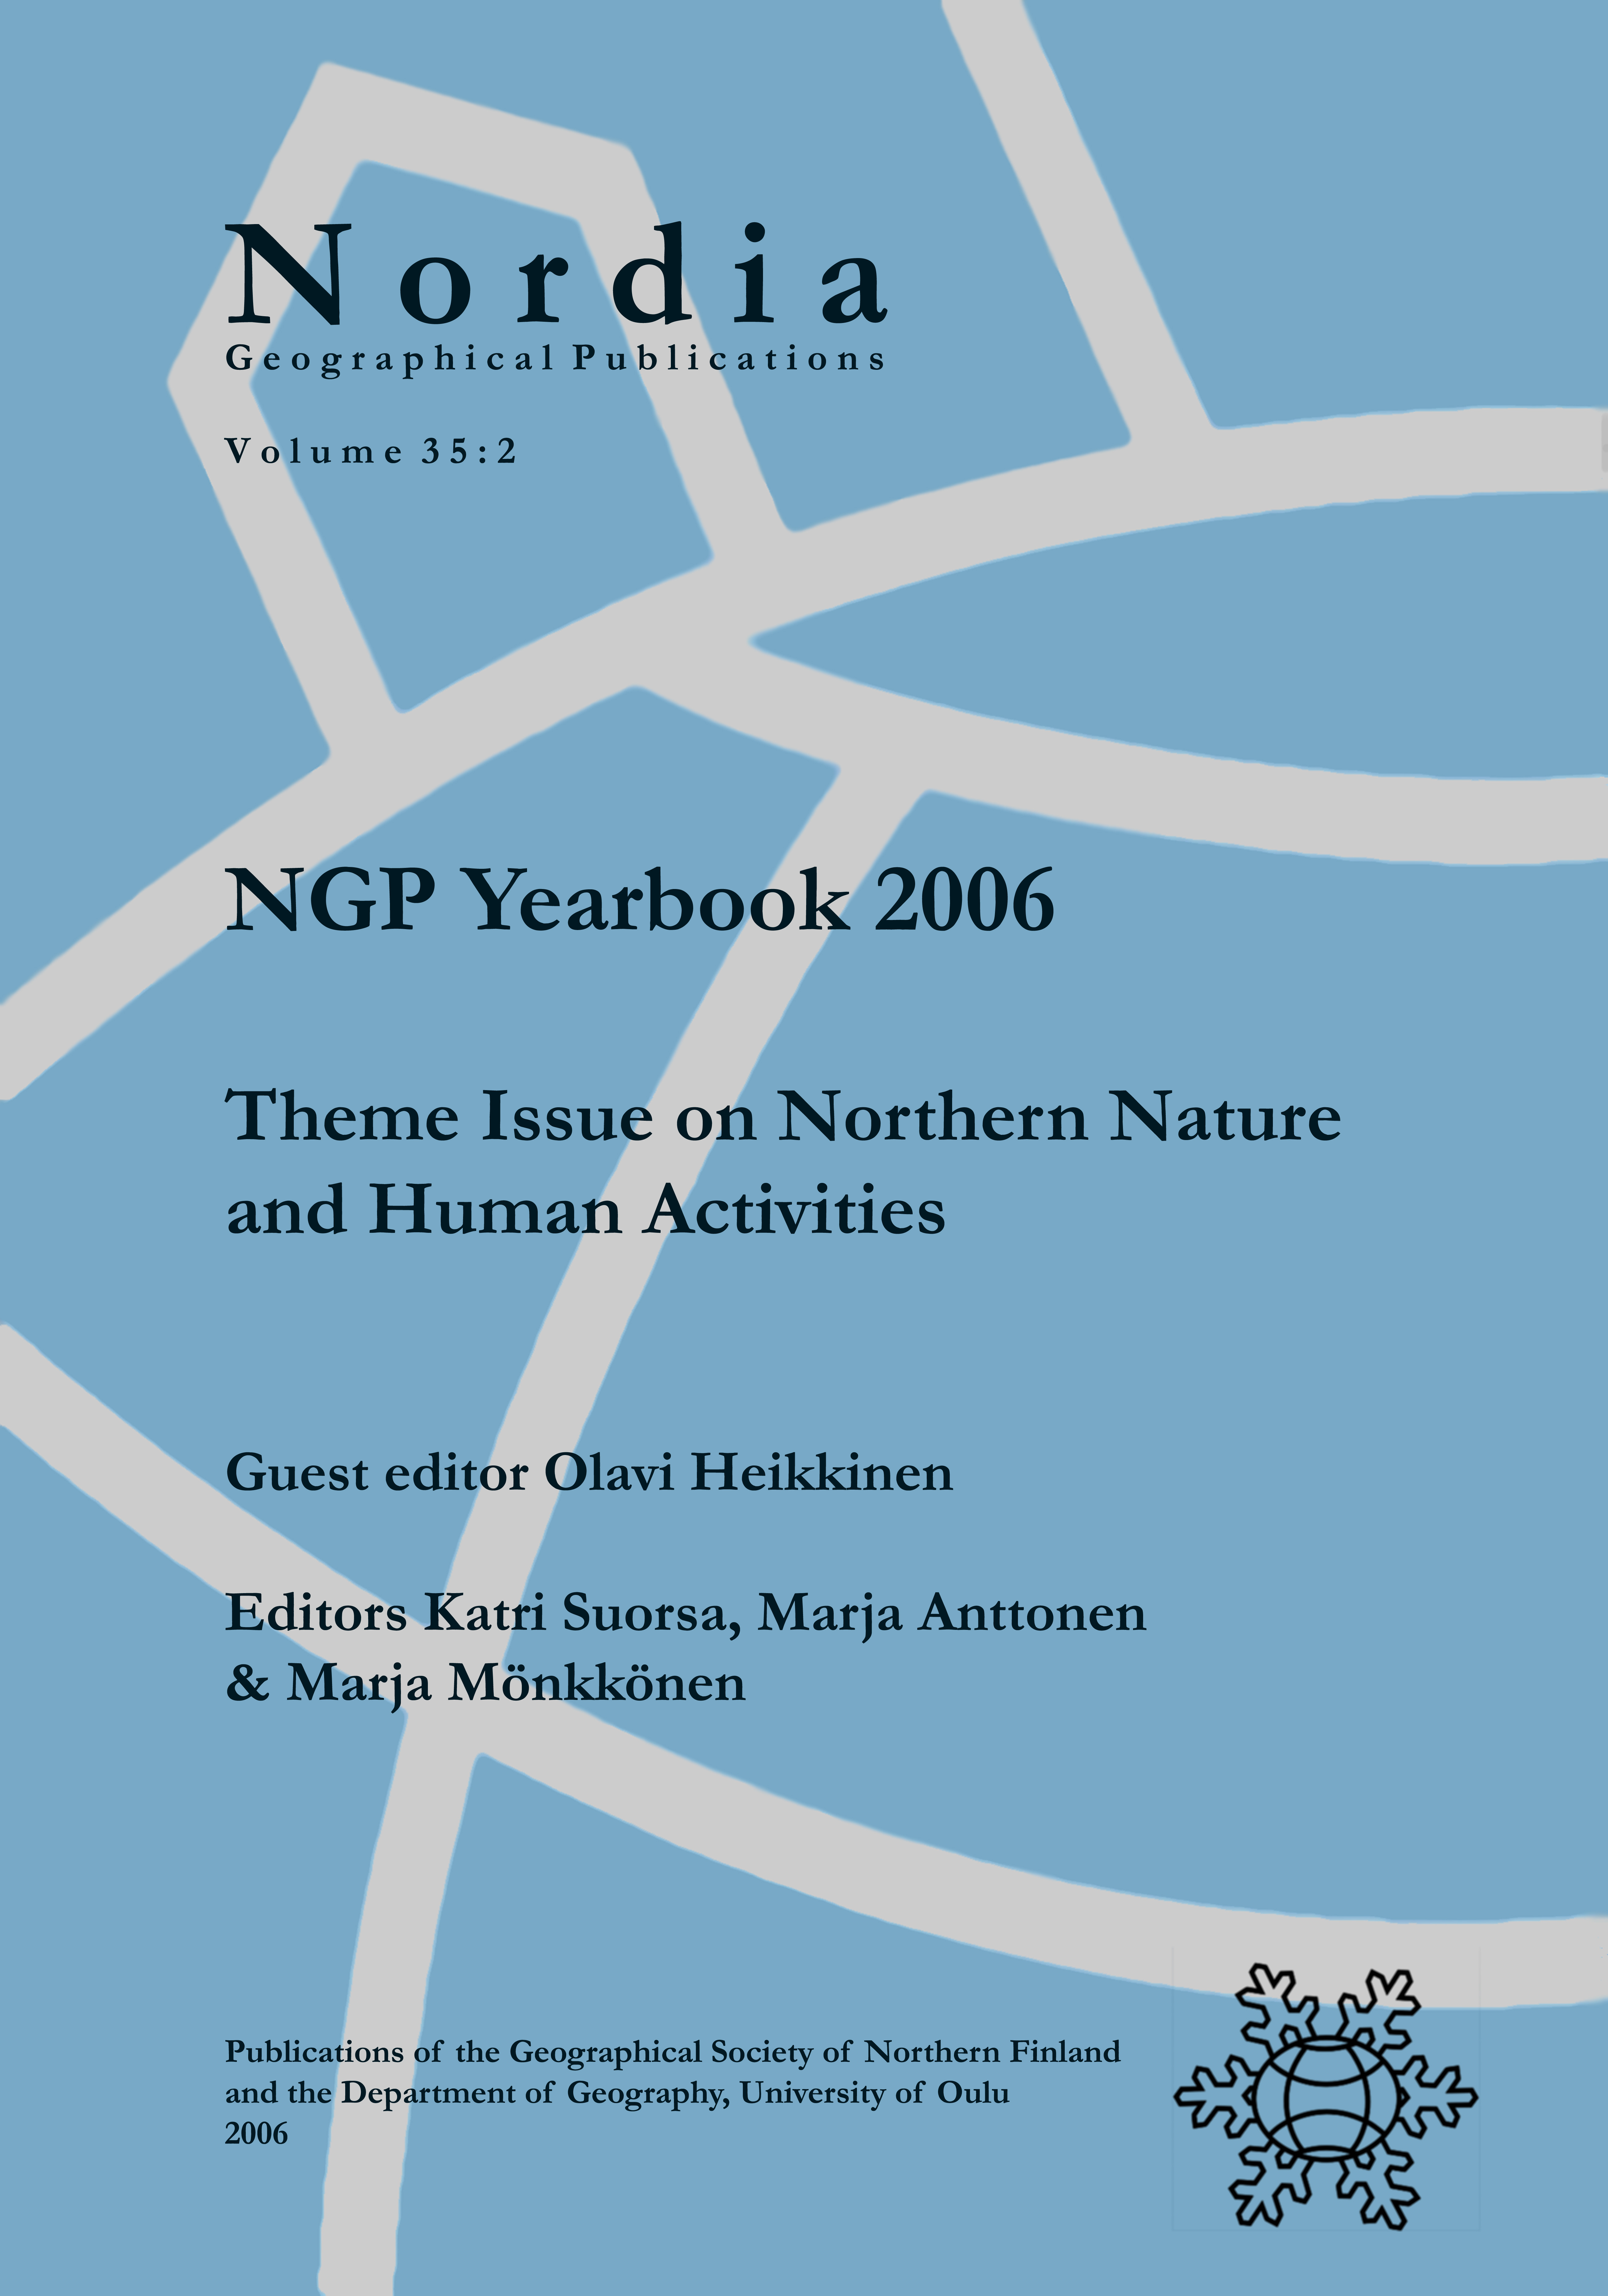 					View Vol. 35 No. 2: NGP Yearbook 2006: Theme Issue on Northern Nature and Human Activities
				